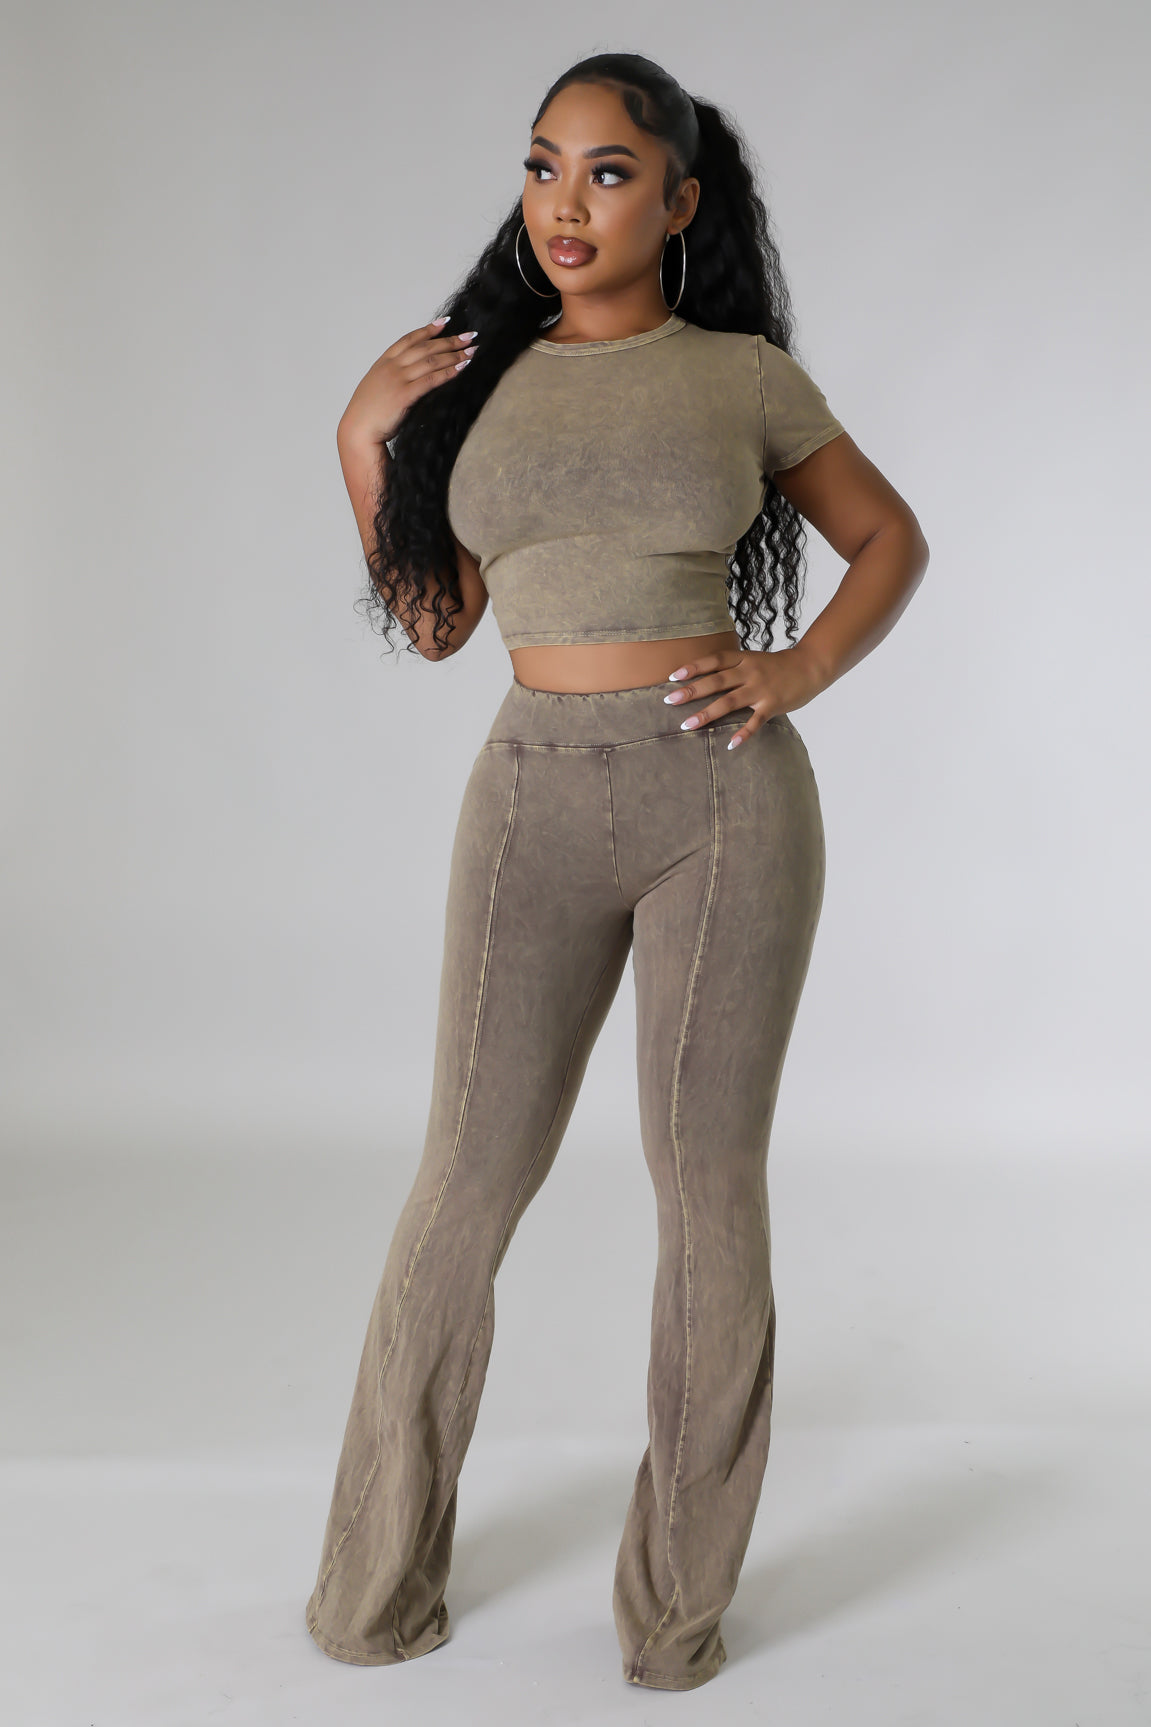 Lazy Afternoon Pant Set